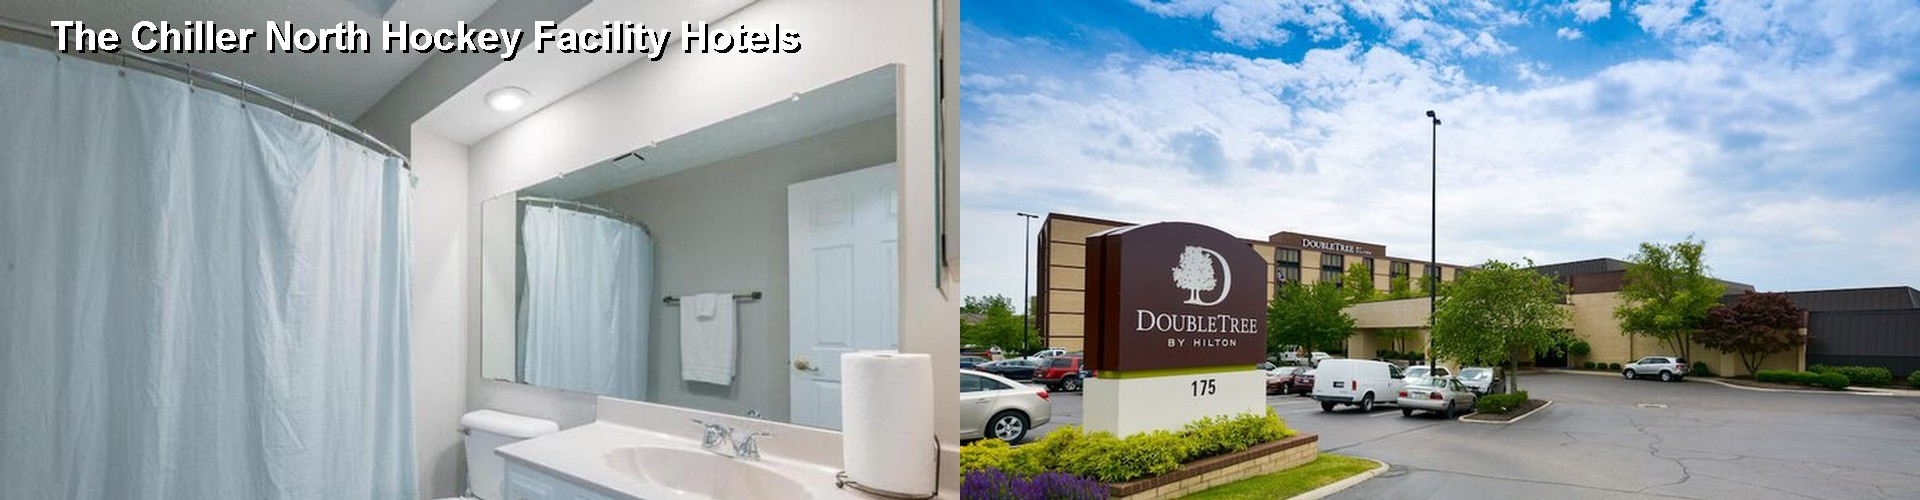 3 Best Hotels near The Chiller North Hockey Facility